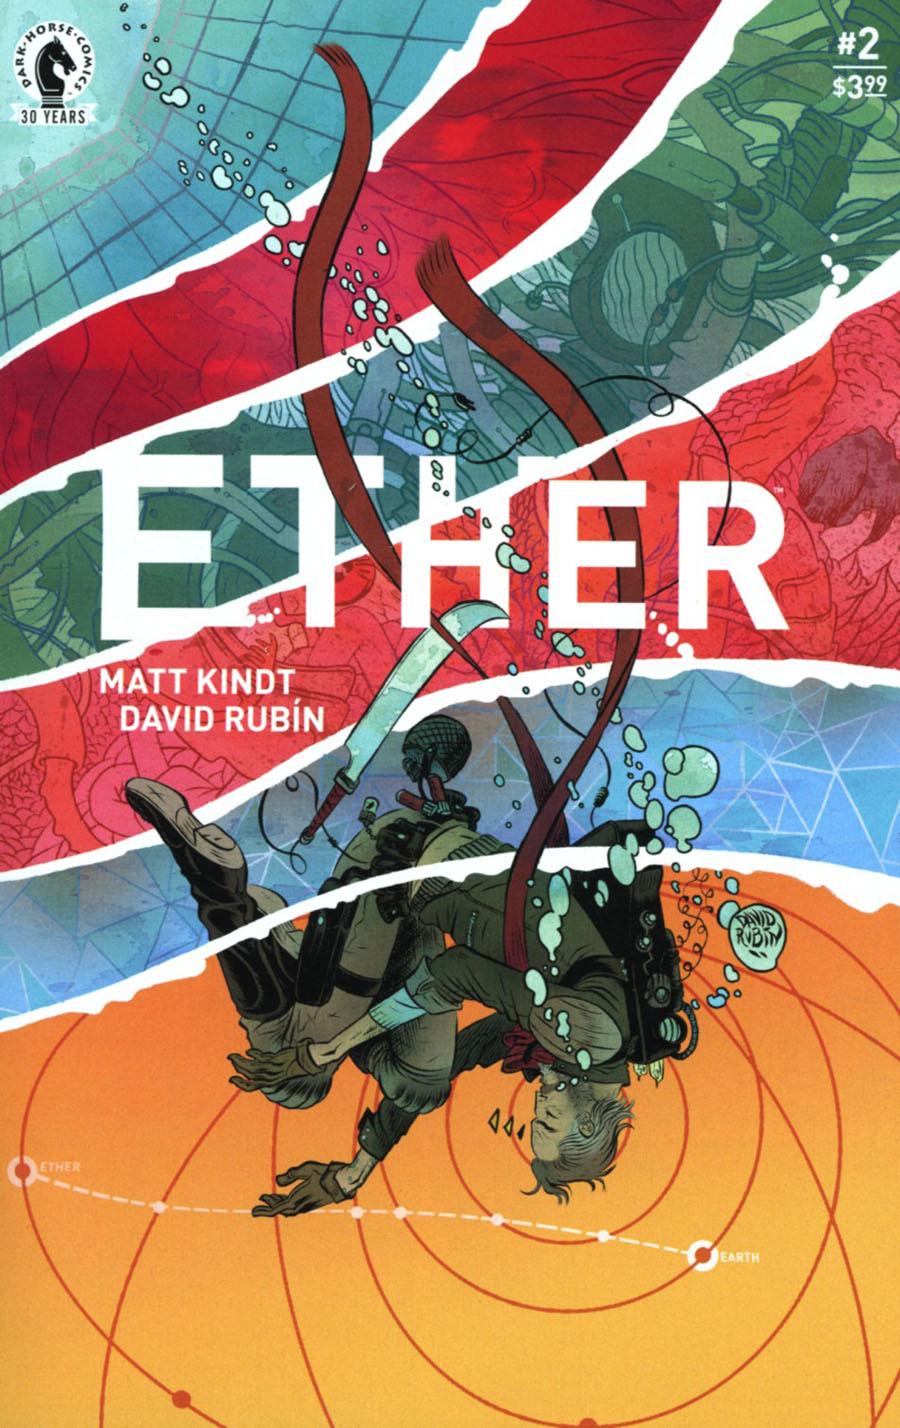 Ether Vol. 1 #2